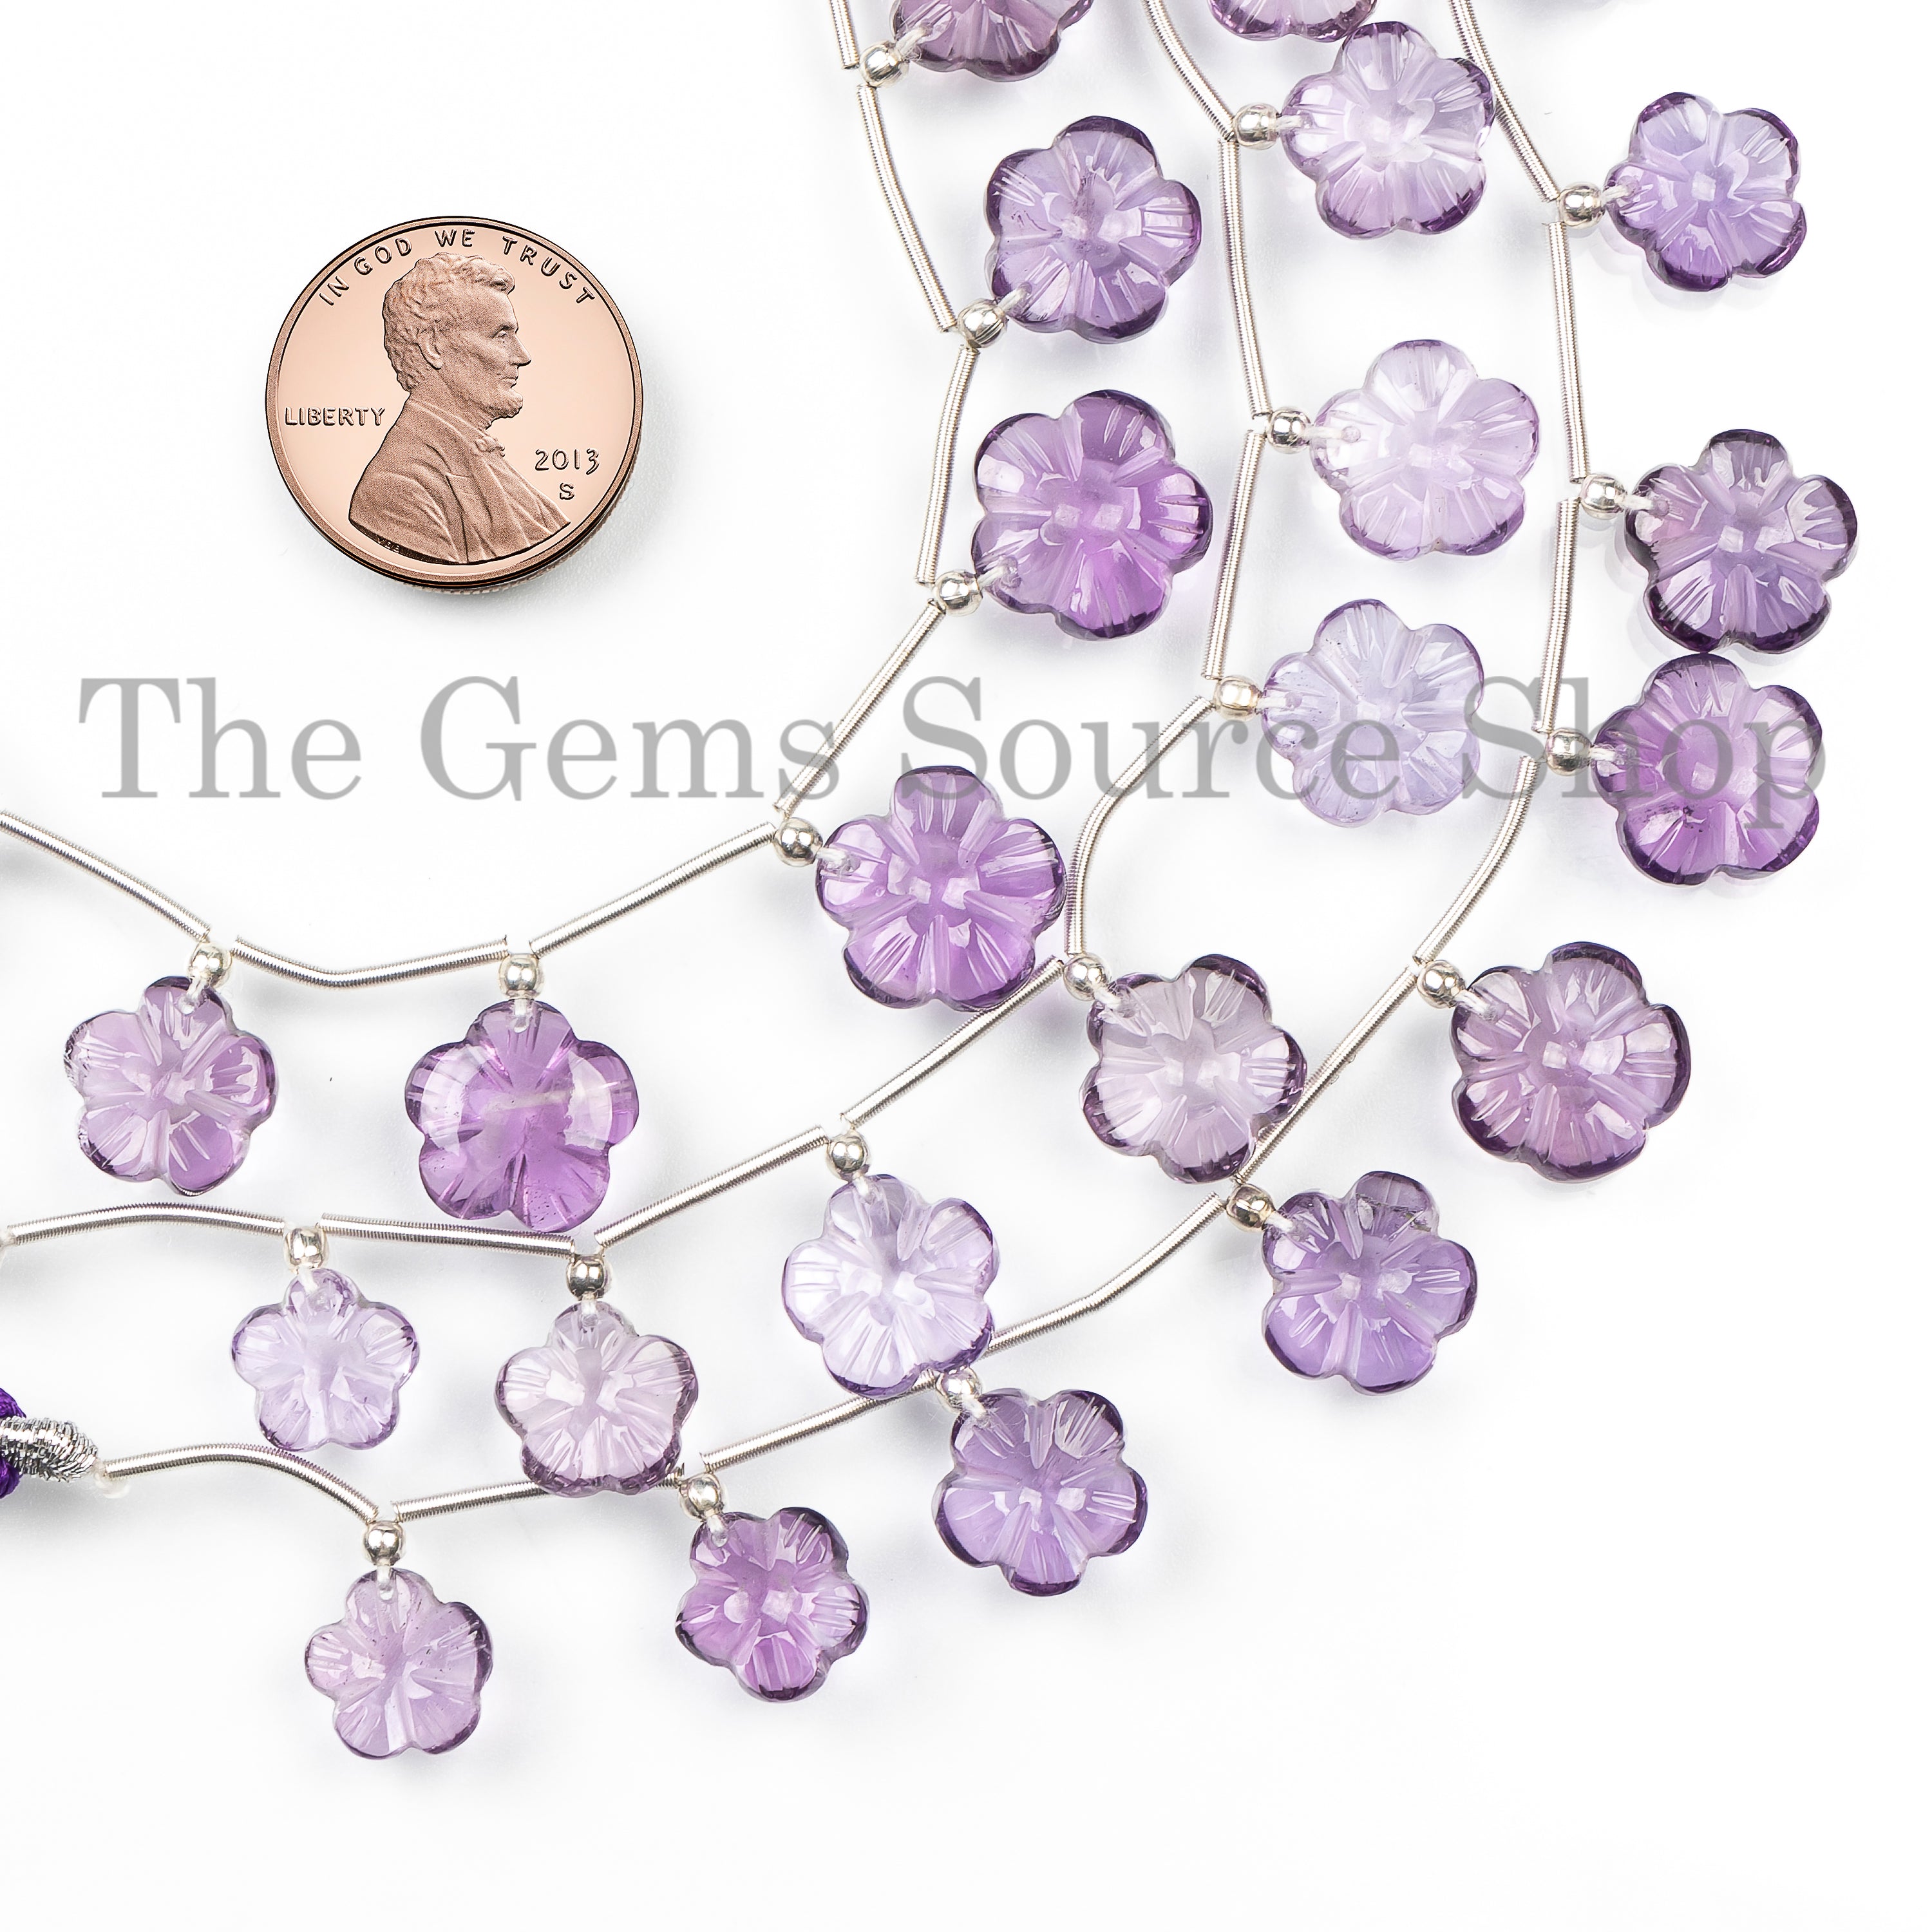 New Arrival Amethyst Flower Carving Gemstone Beads, African Amethyst Beads, Amethyst Carving Beads For Jewelry